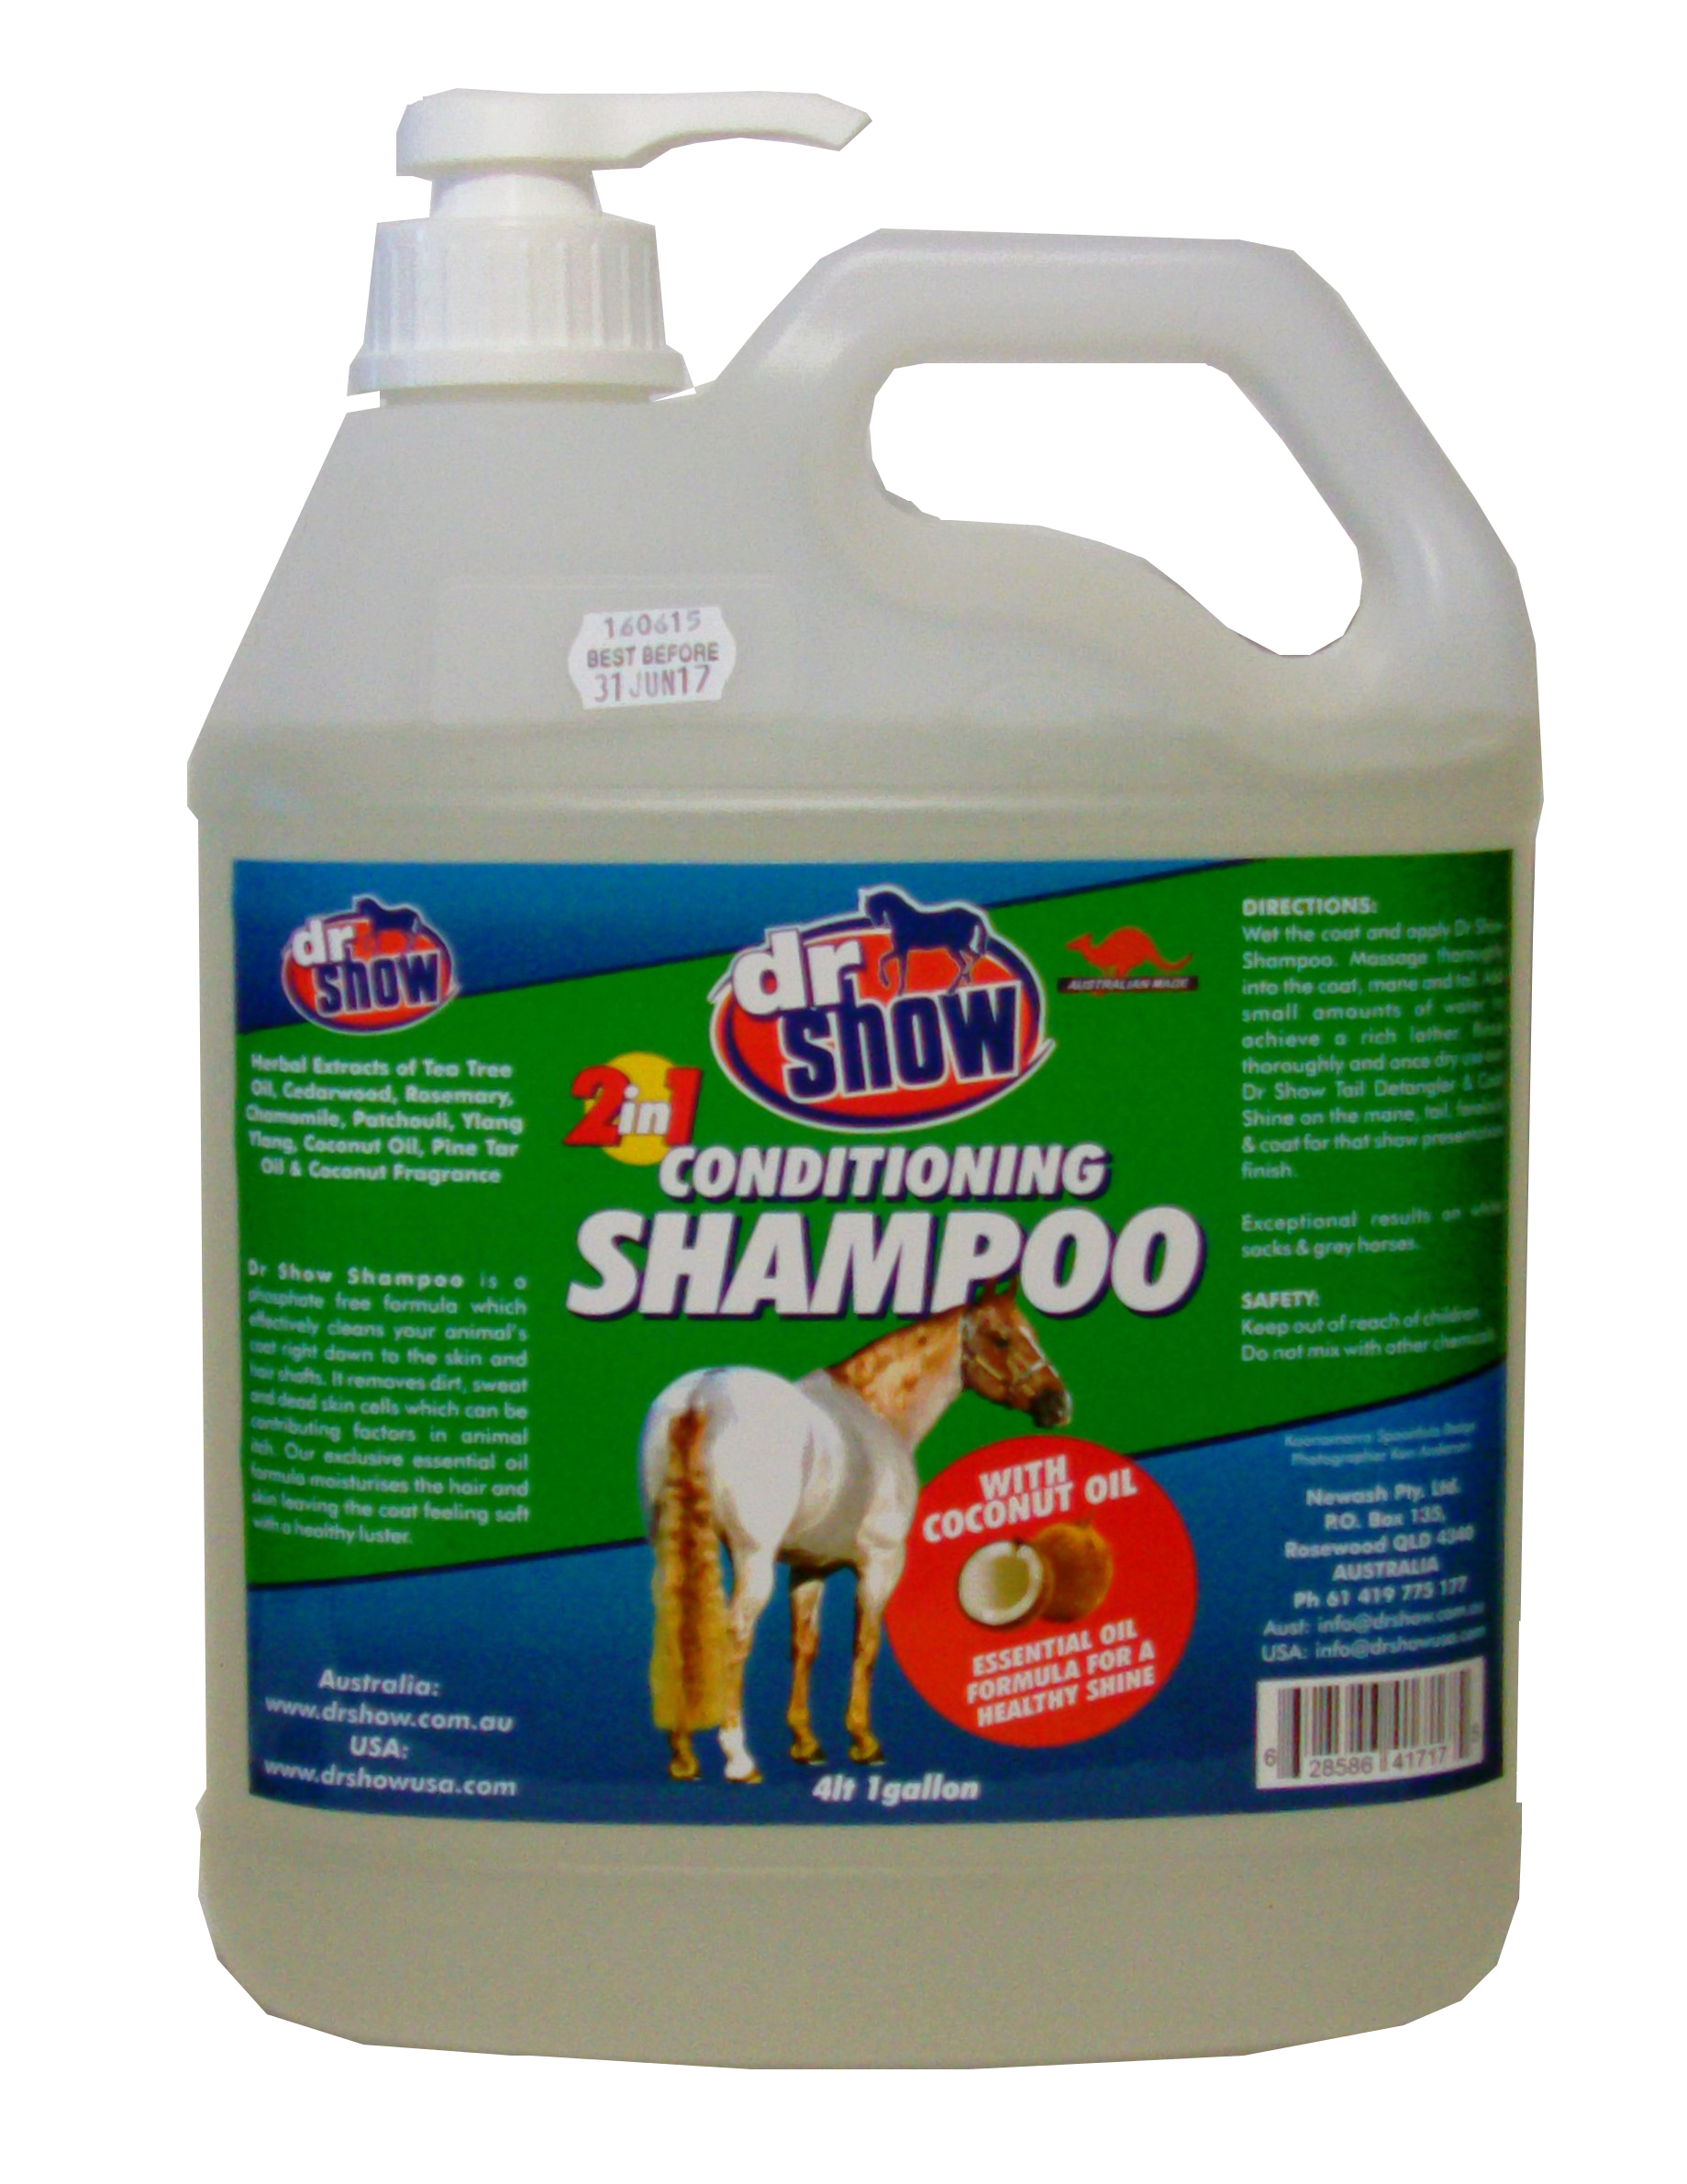 Dr Show Conditioning Shampoo All in One